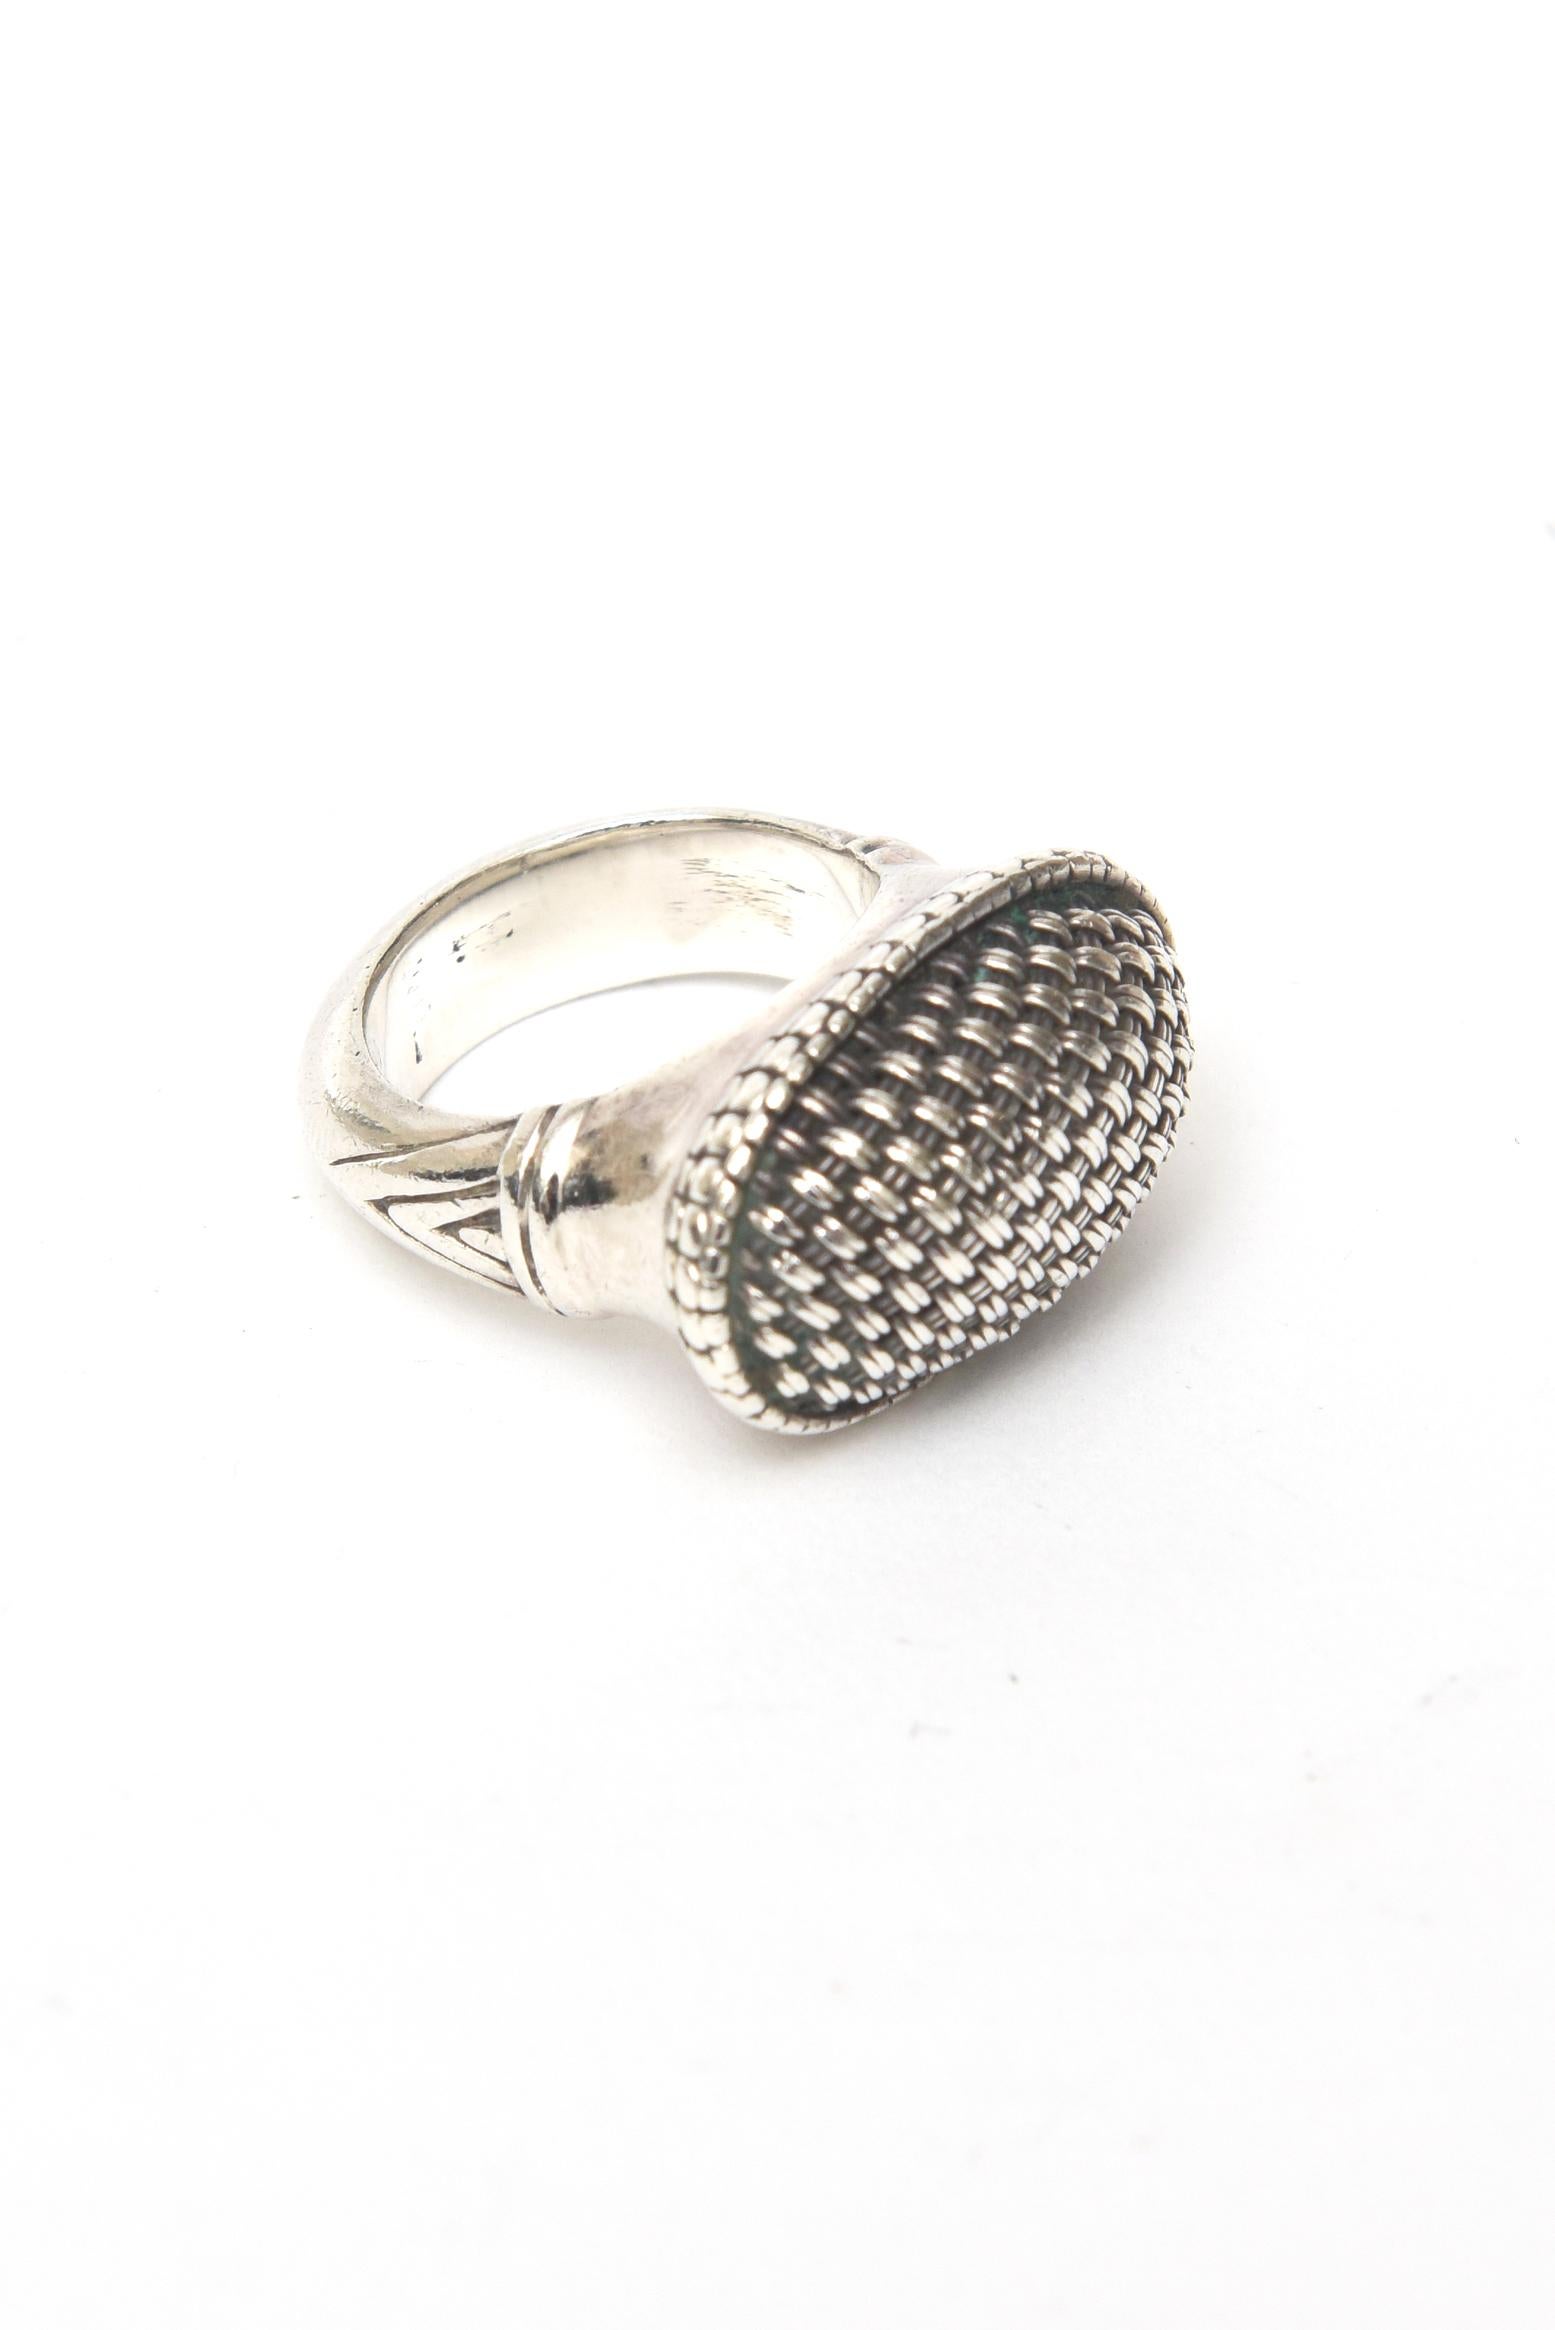 This beautiful John Hardy sterling silver hallmarked dome ring is one of his very early pieces that he created when he started his design work. It is hallmarked inside It has a beautiful criss cross of sterling silver and reads 925 with illegible